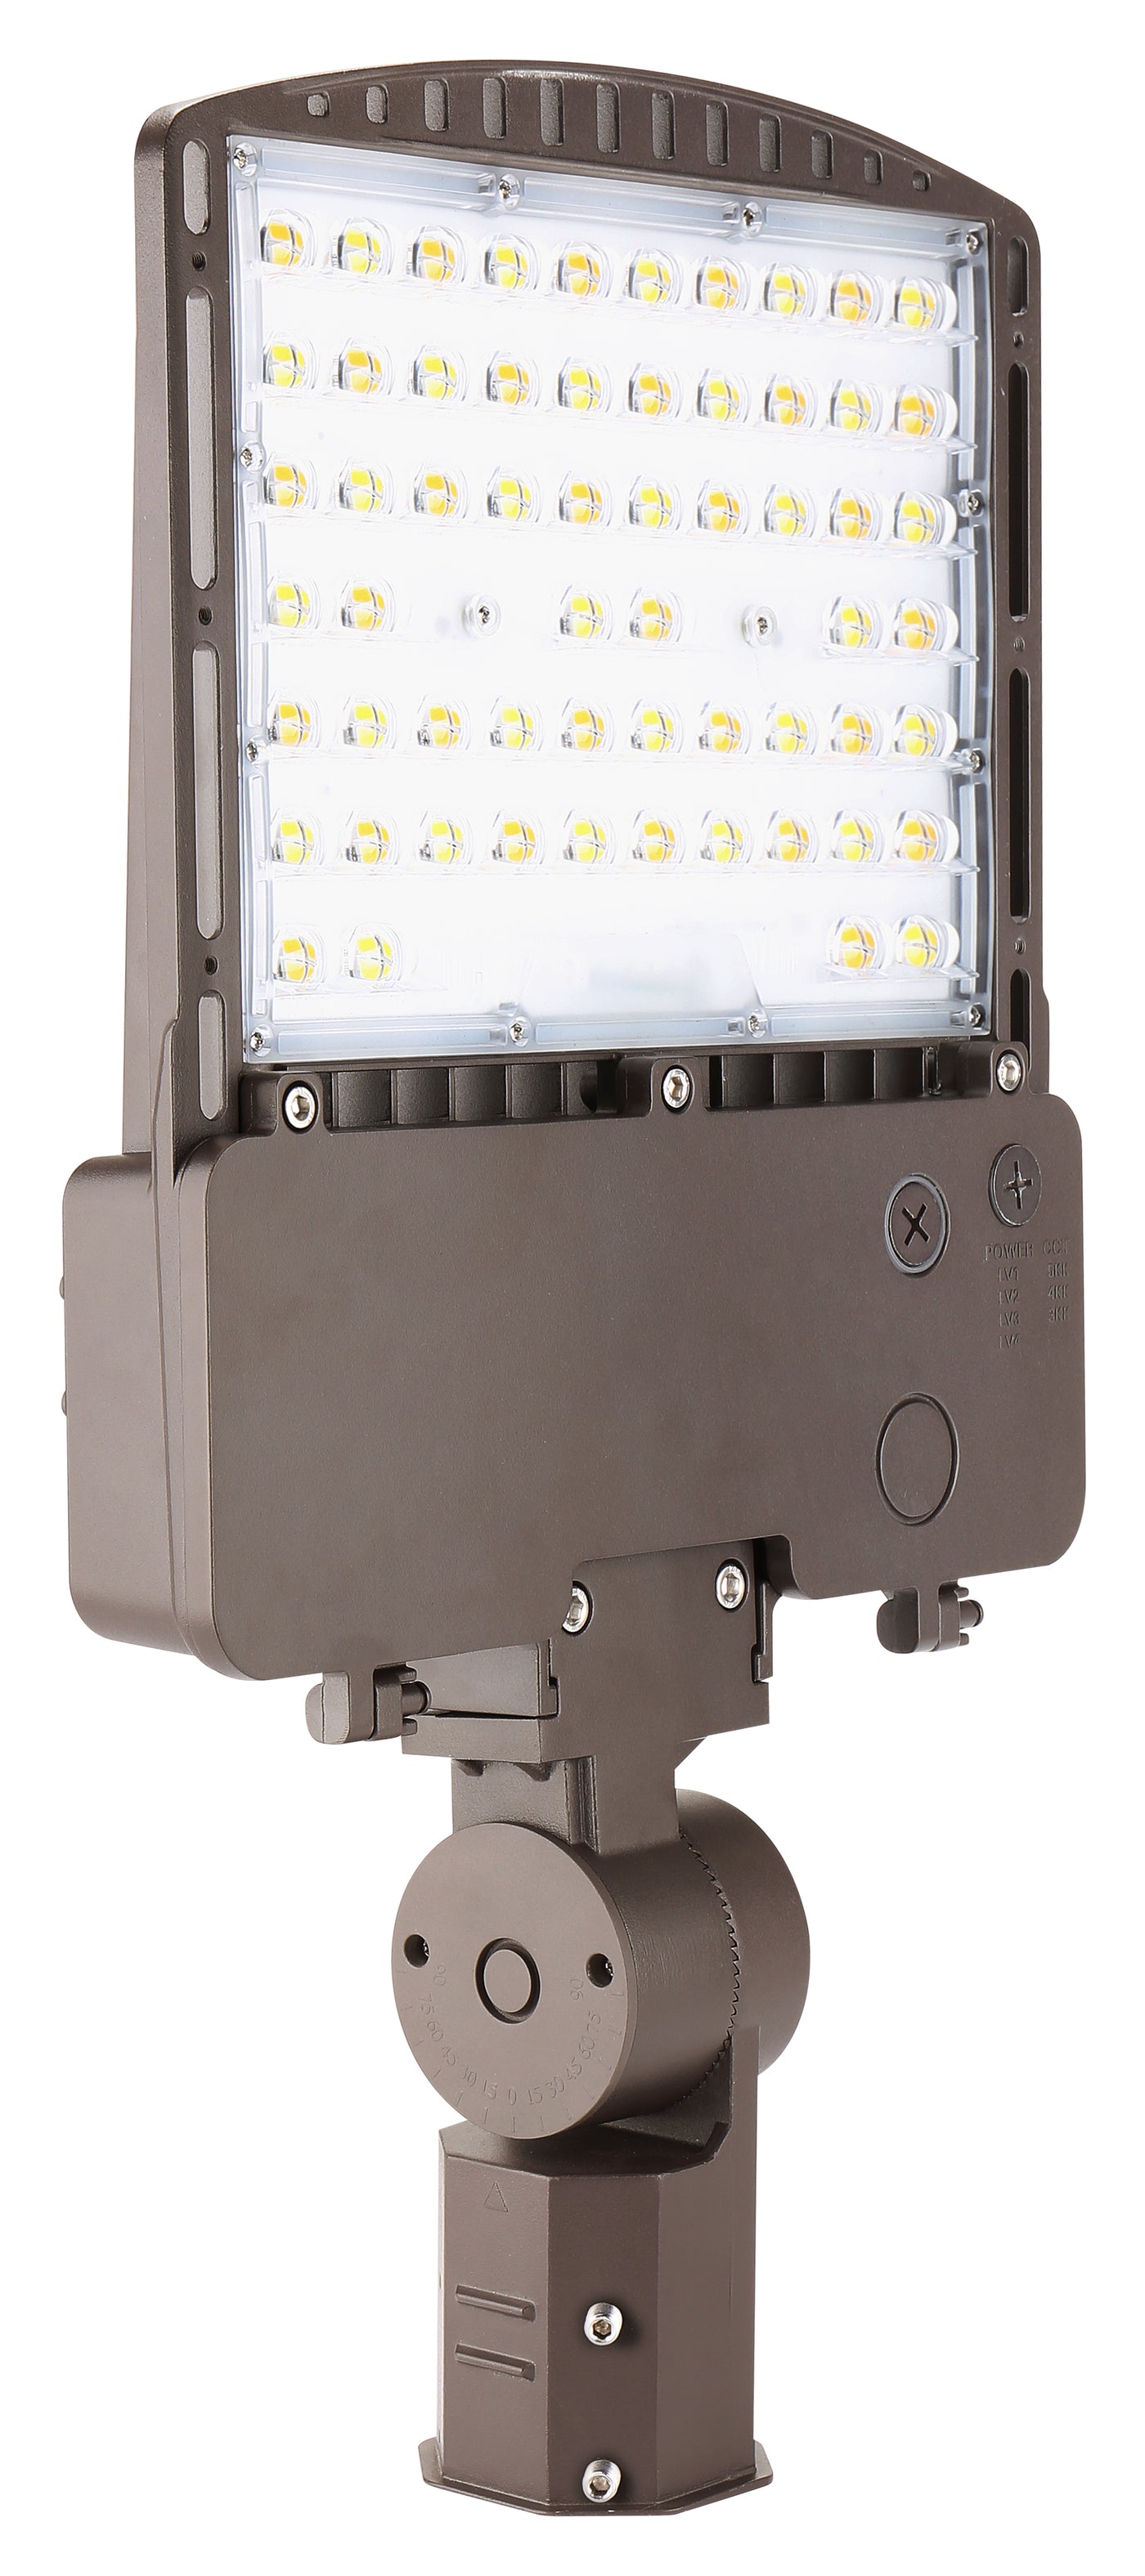 LED Area/Parking Lot Light, 23000 Lumen Max, Wattage and CCT Selectable, Type III Distribution, 120-277V, Dark Bronze Finish